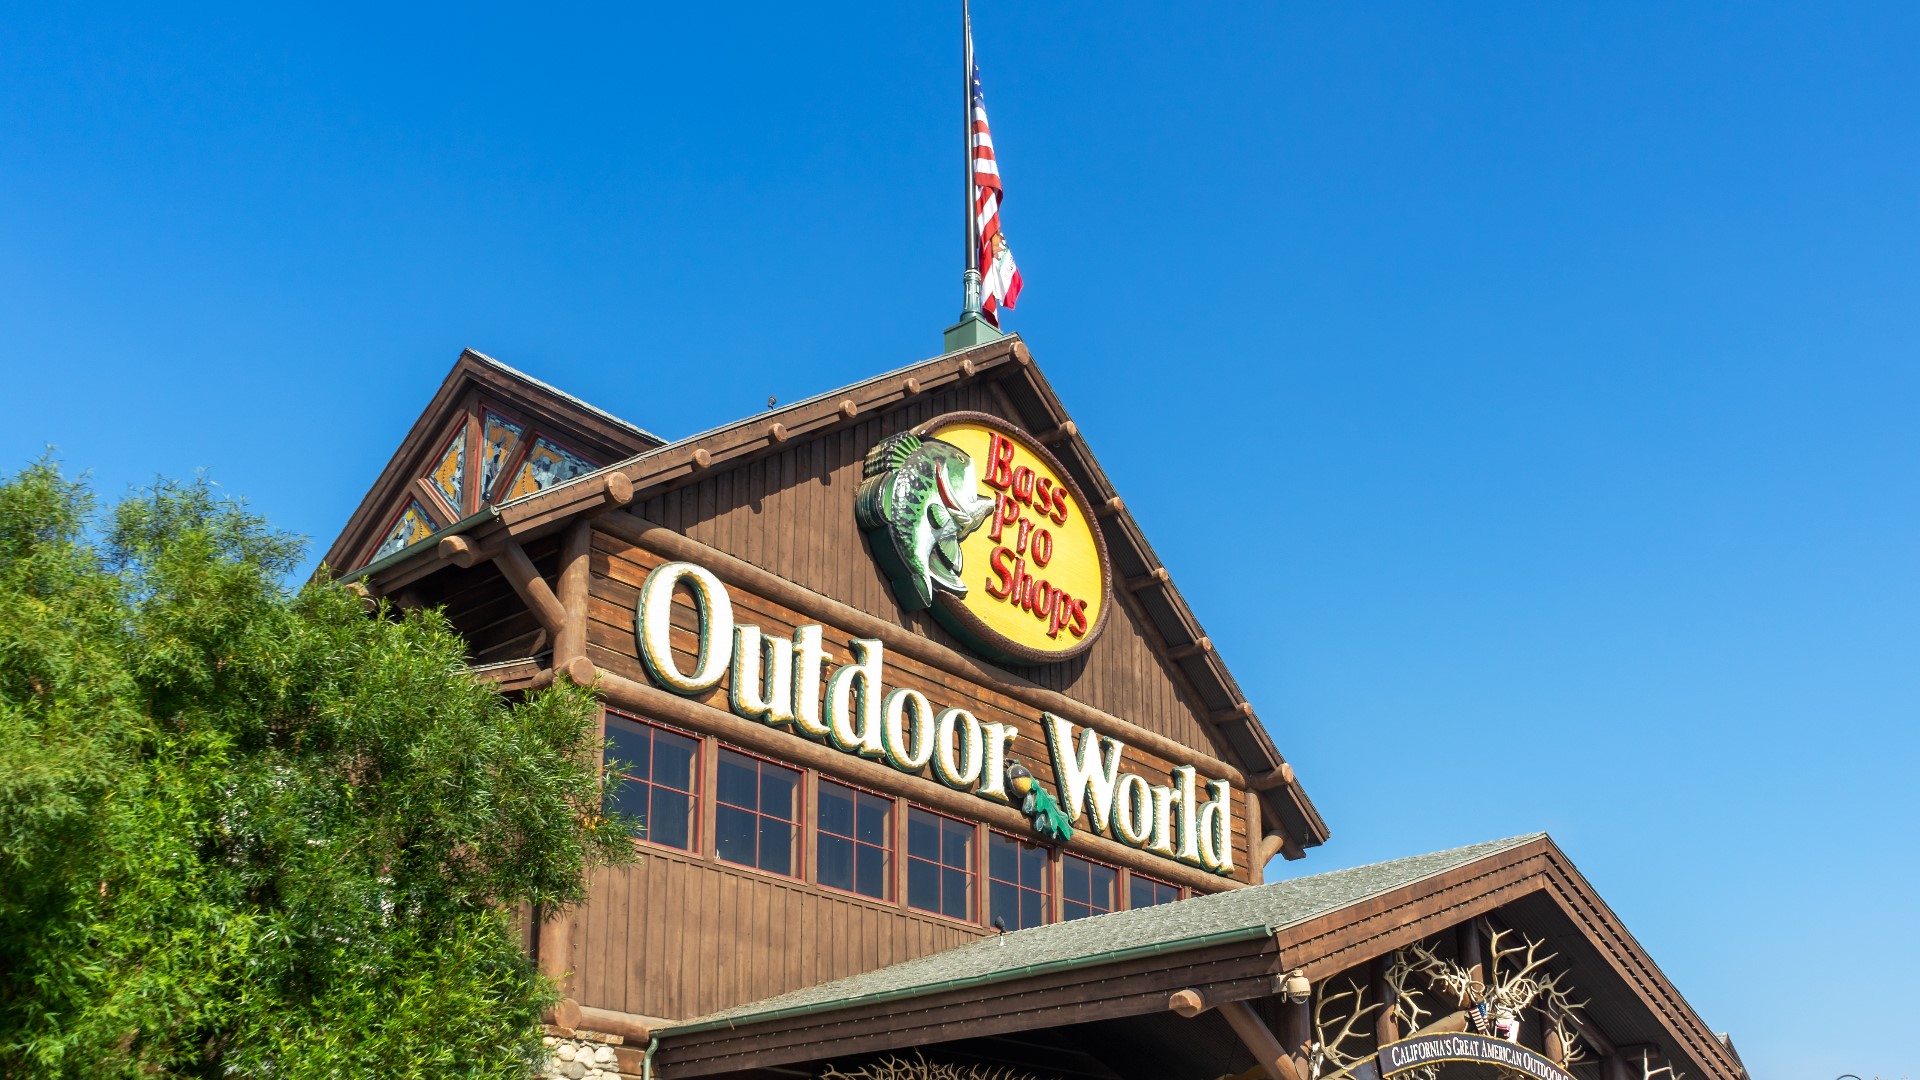 Bass Pro Shops, which has 200 stores and Tracker Marine Centers in North America, has recently announced plans to build more locations.